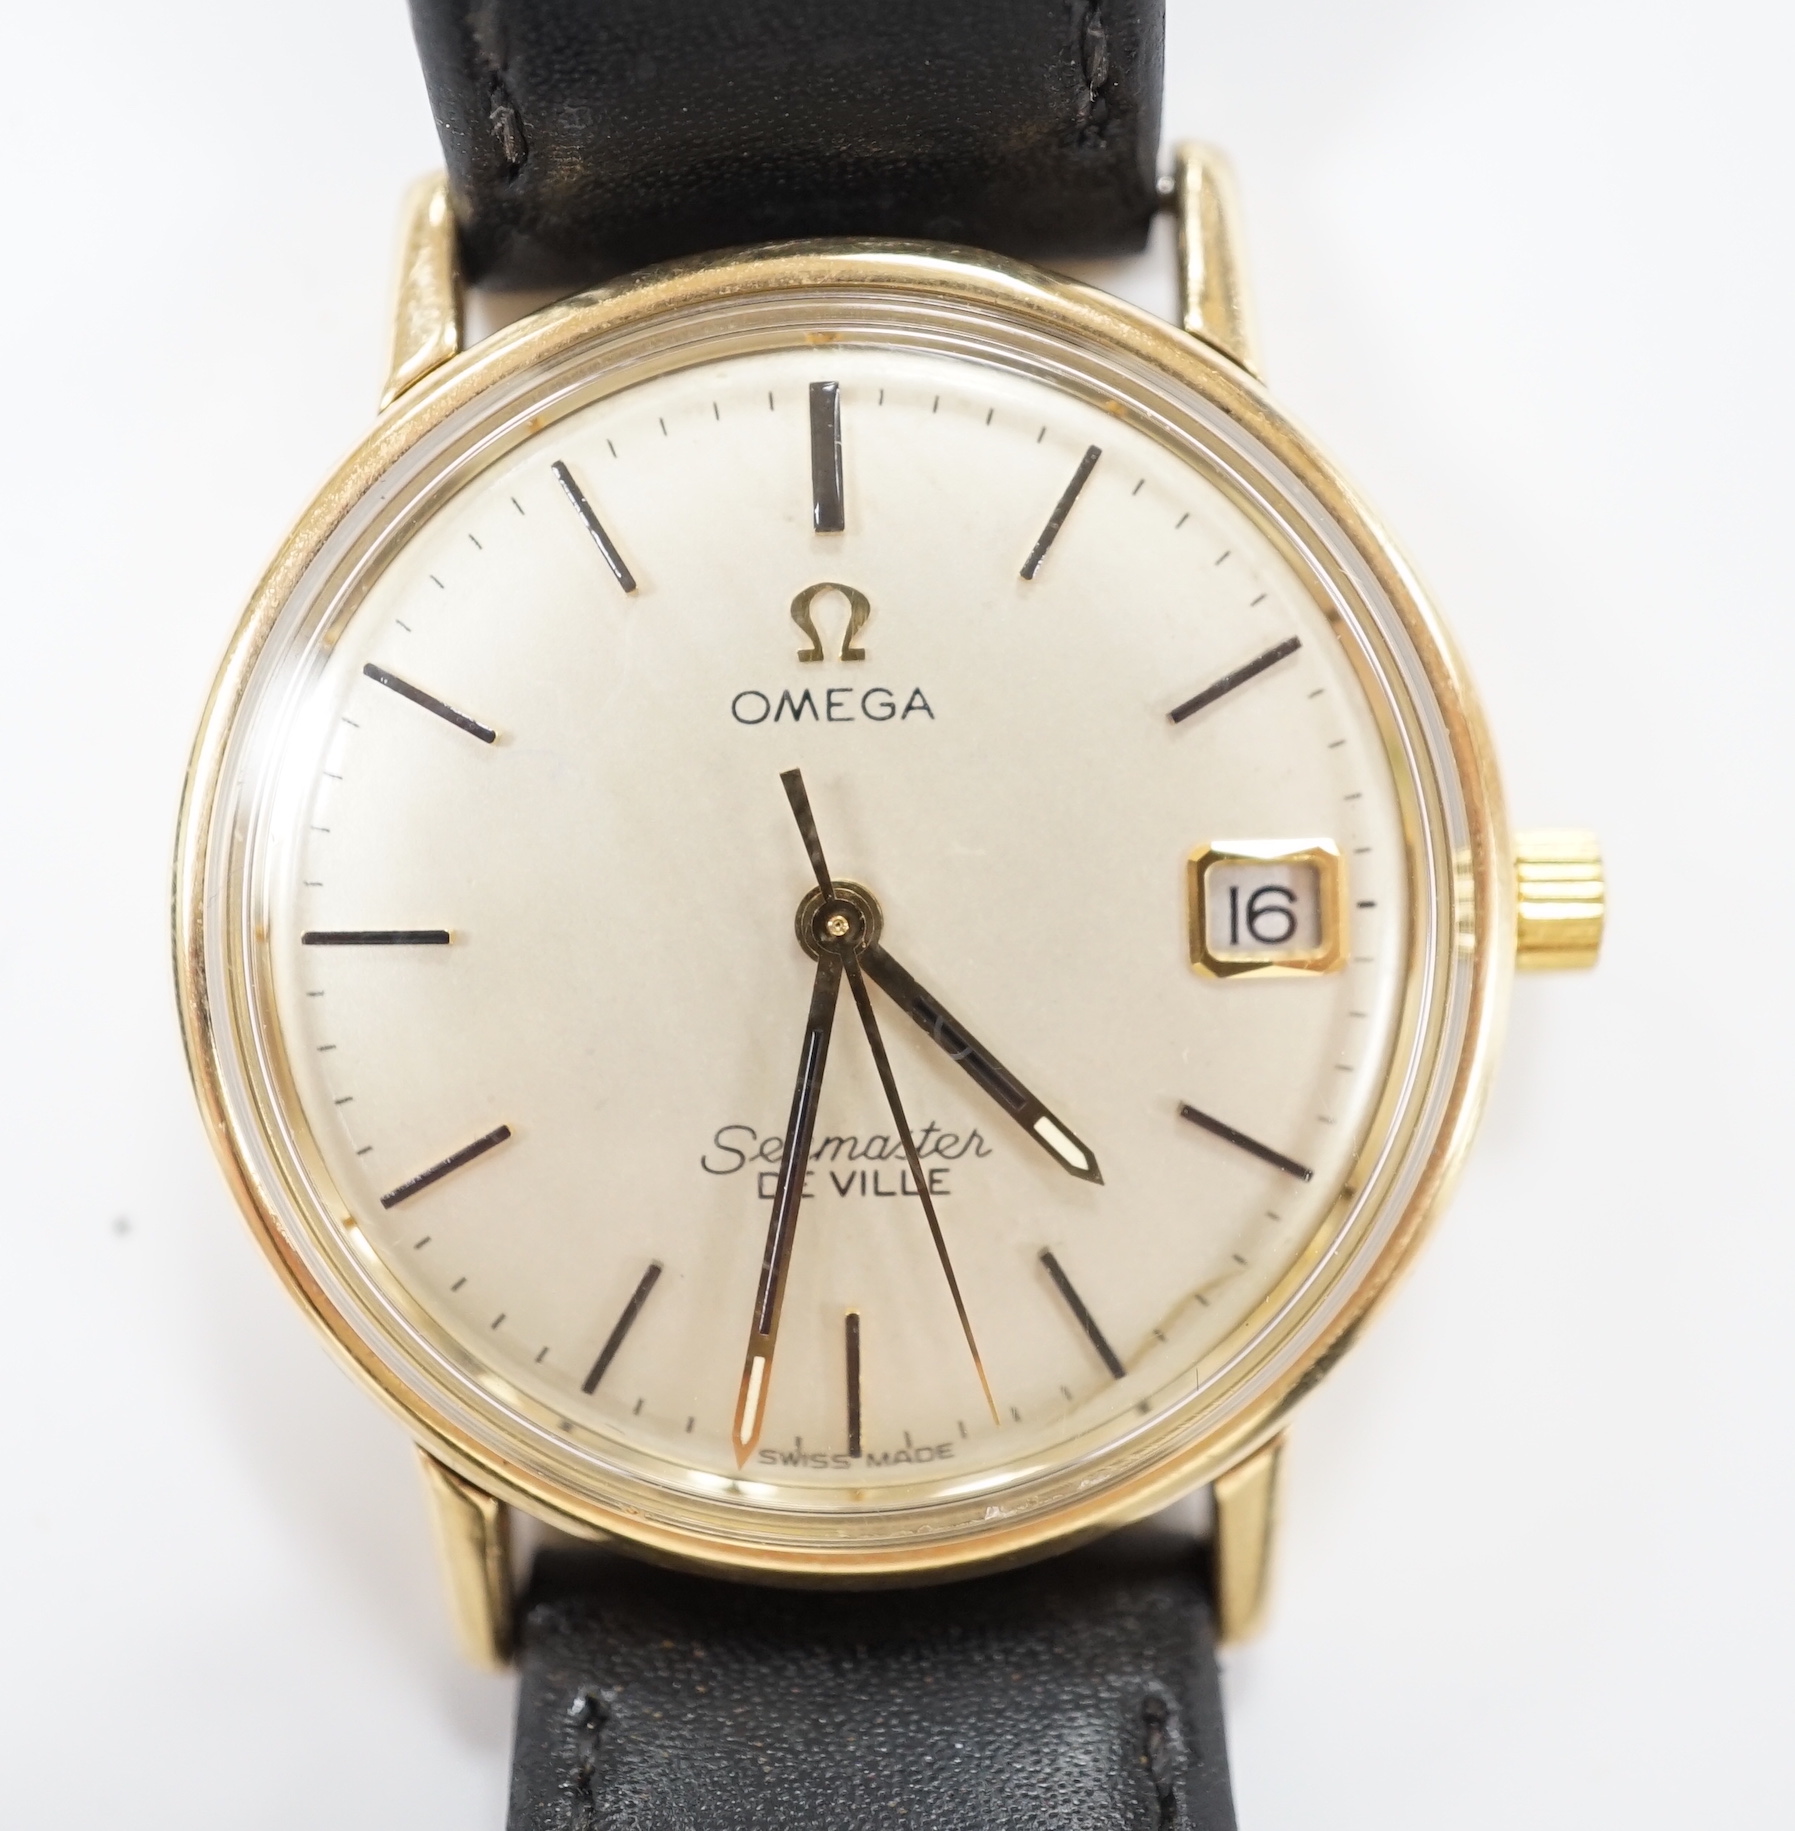 A gentleman's yellow metal Omega Seamaster De Ville manual wind wrist watch, on associated leather strap, case diameter 34mm, no box or papers.